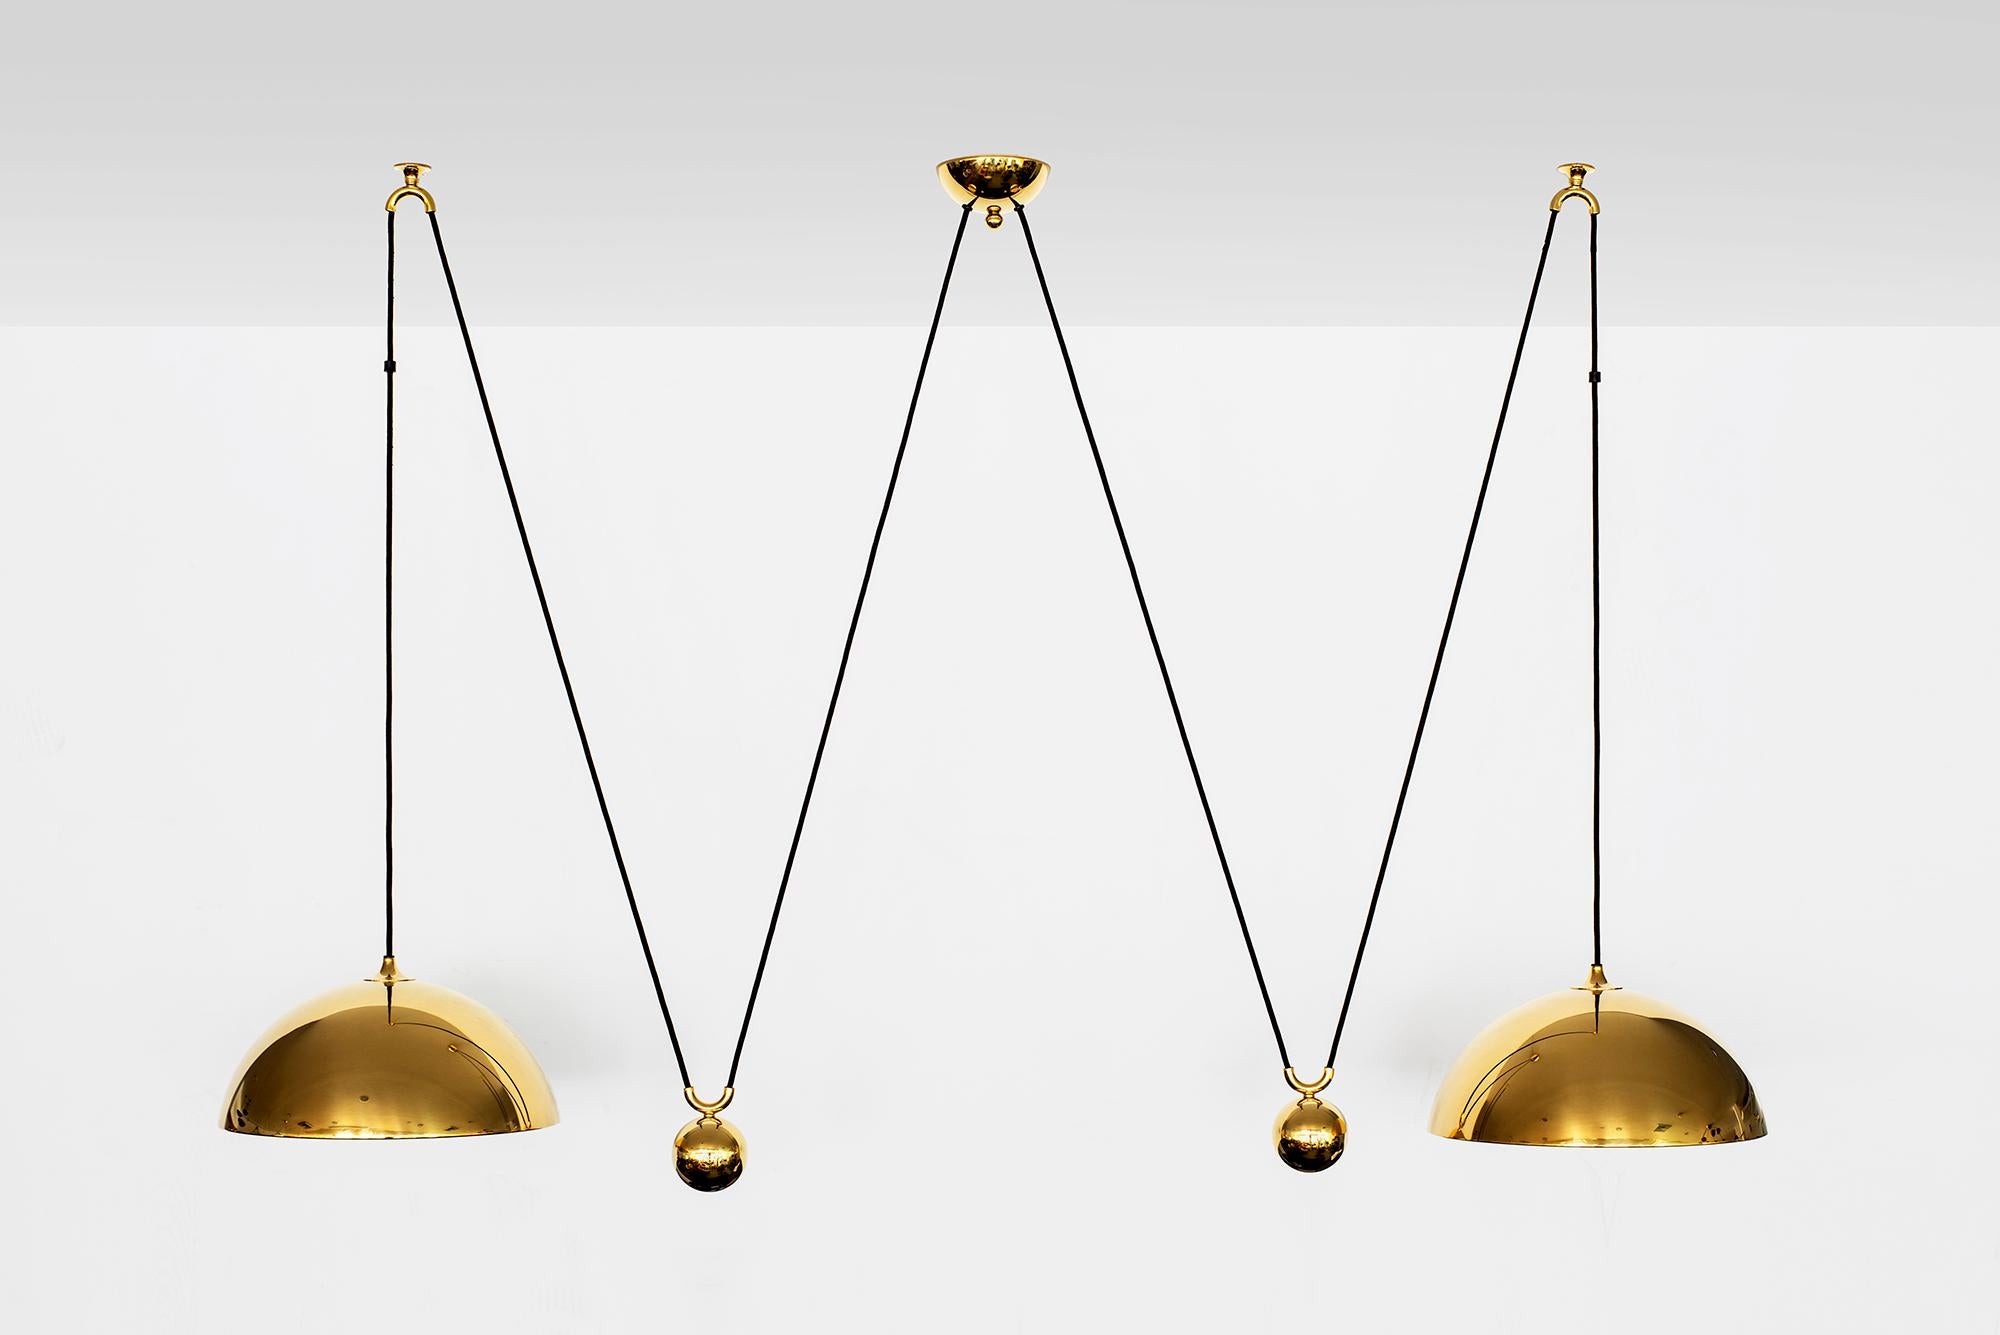 Double brass dome counterbalance pendant by Florian Schulz. 
Two brass pendants suspended, each with their own brass ball counter balance pulley system. 
One center canopy supports both pendants. Each light is adjustable in height without